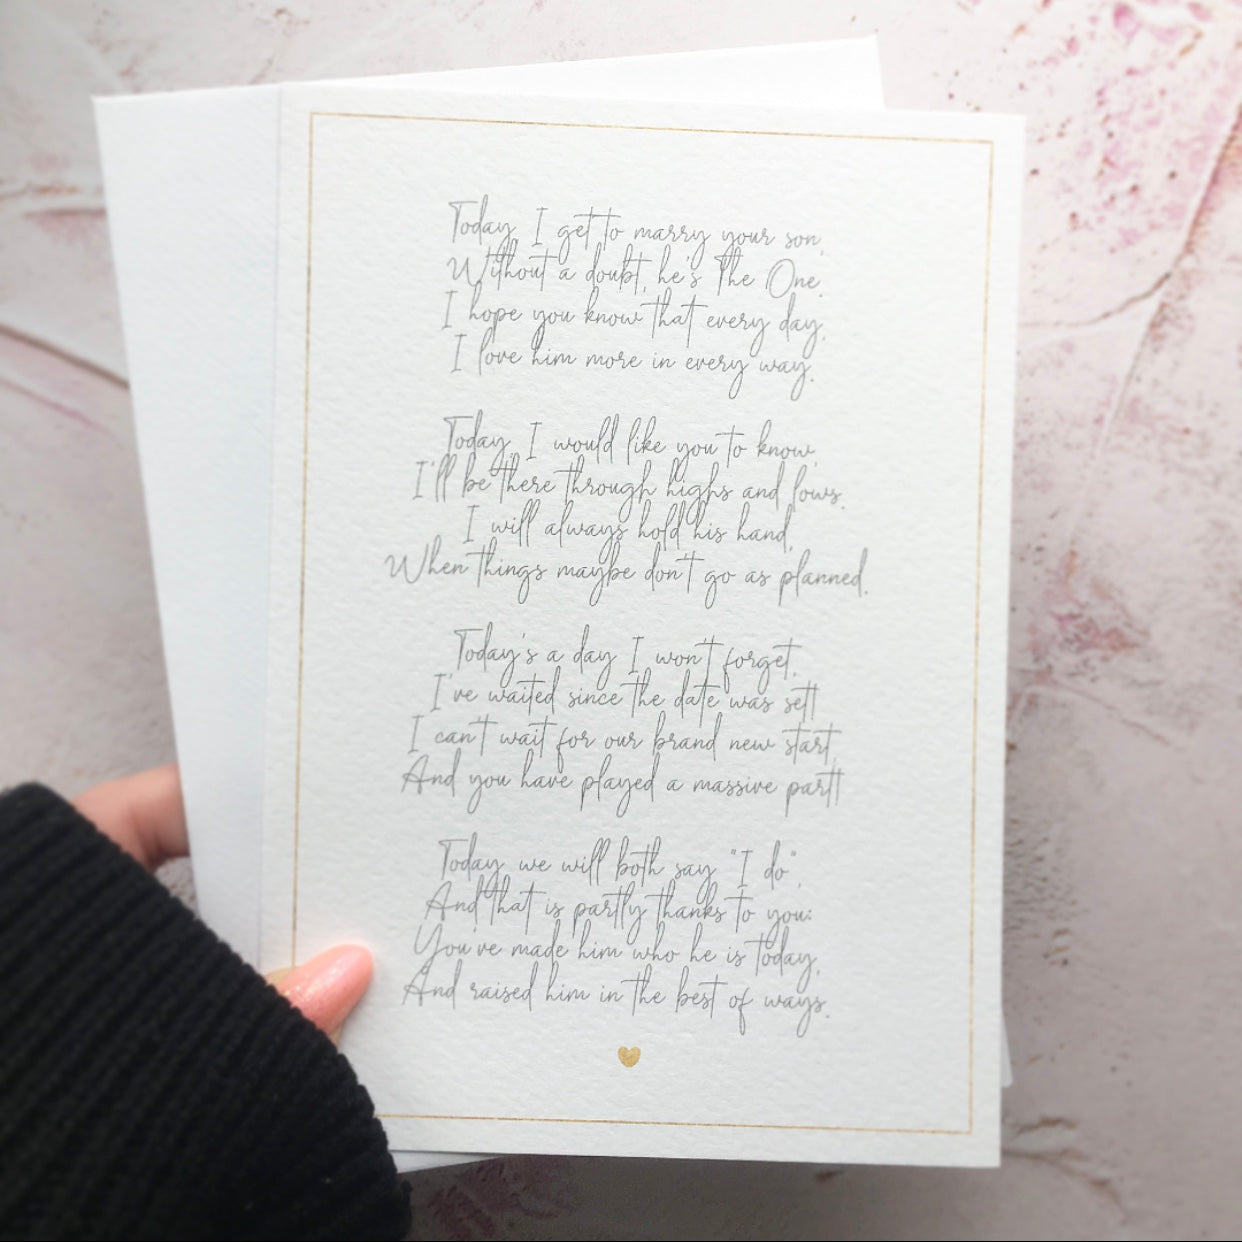 'Today, I will marry your son' - Printed Poem to Gift Future Mother- or Father-in-Law